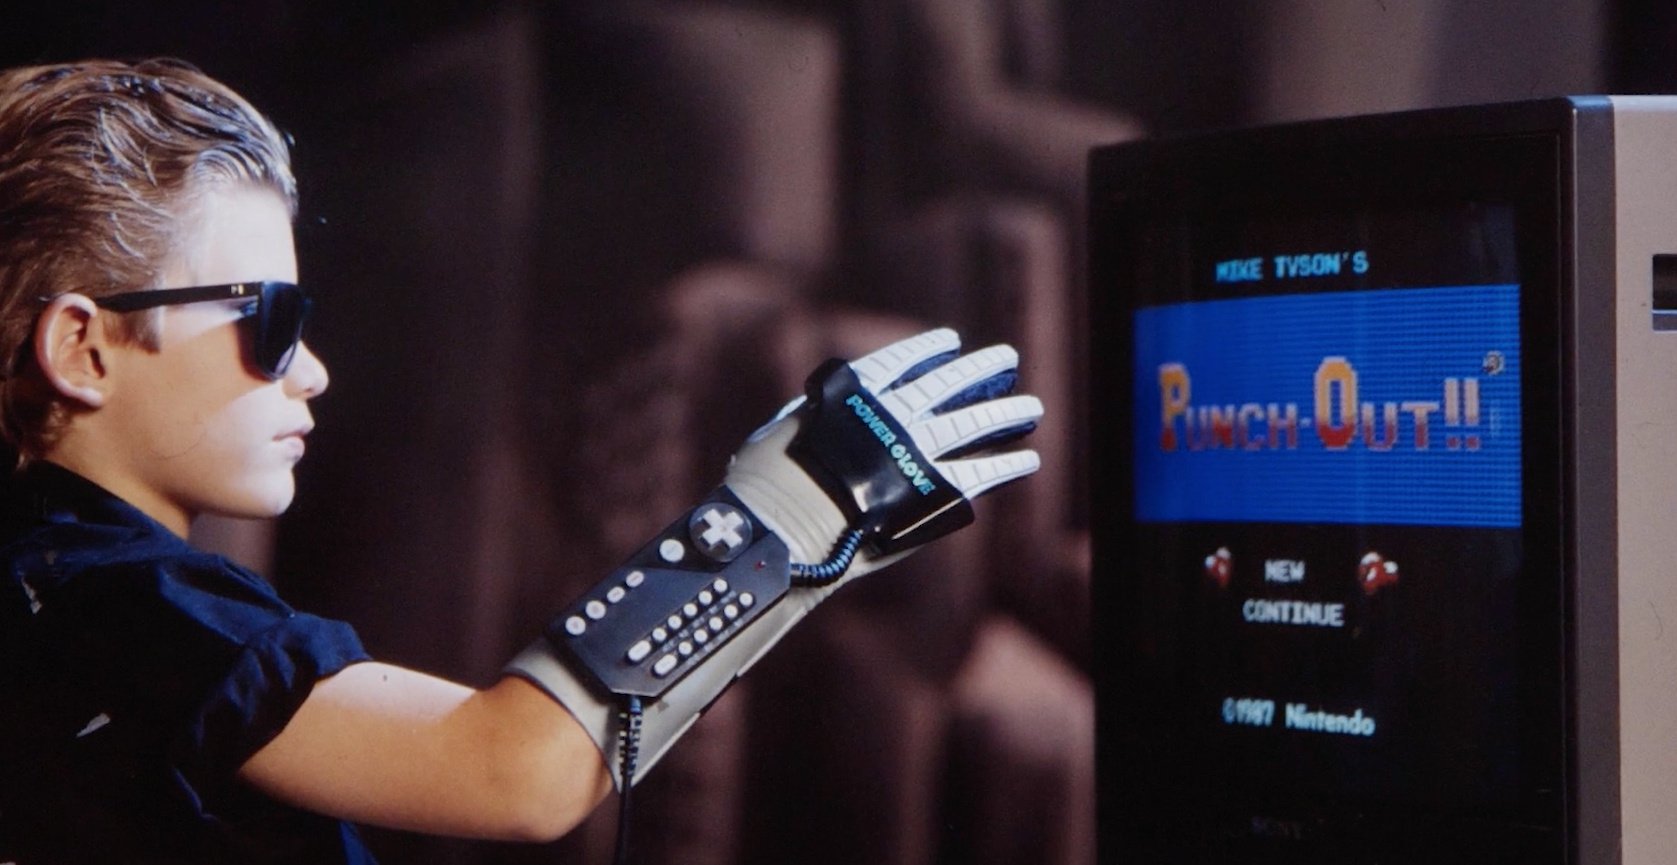 over hyped products and events  --  The Power Glove